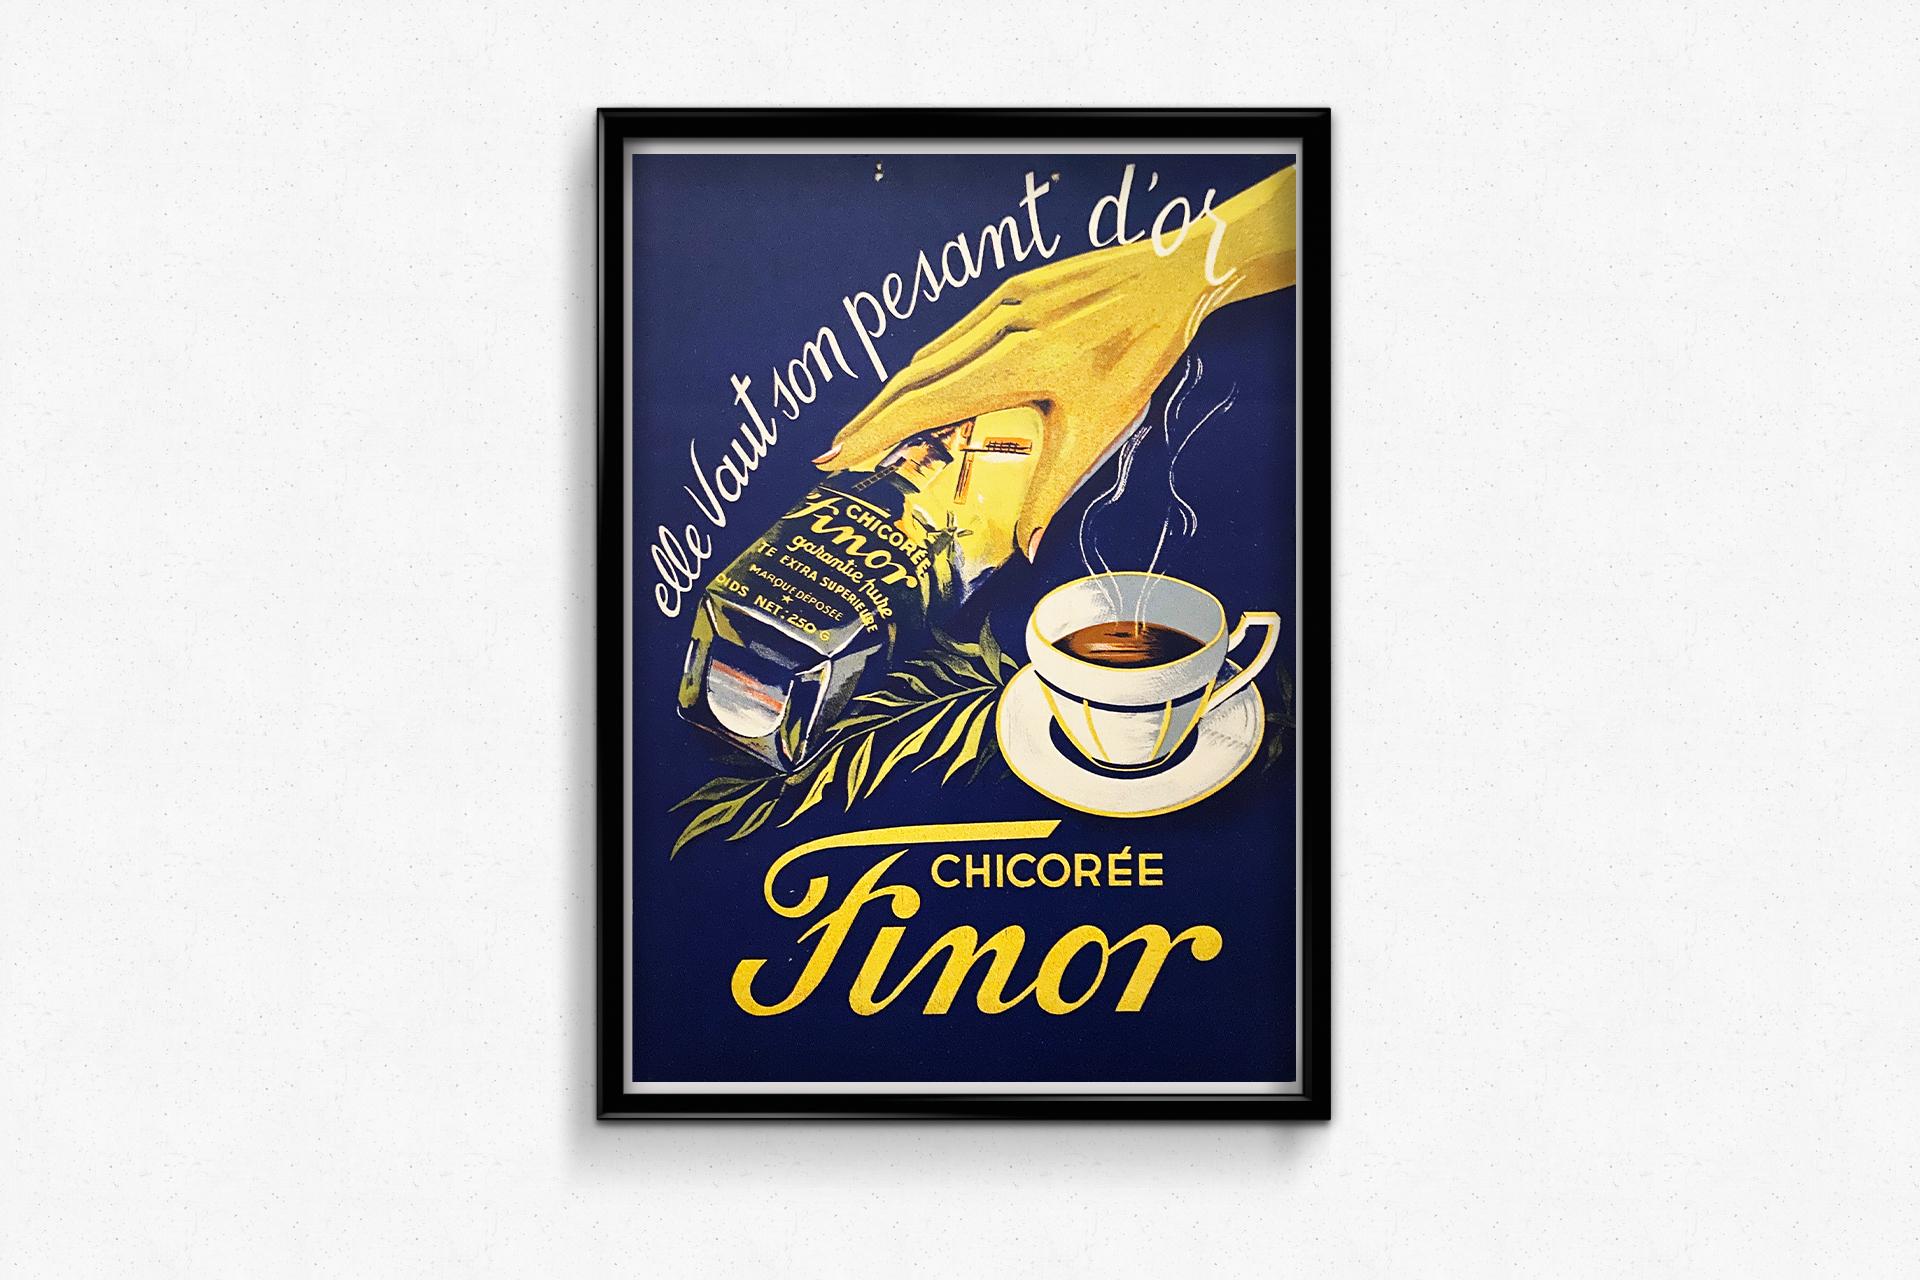 This advertising card was created to promote the famous Finor chicory brand.

French history is closely linked to chicory consumption. Indeed, it was when the English imposed a continental blockade on Napoleon that France experienced its first